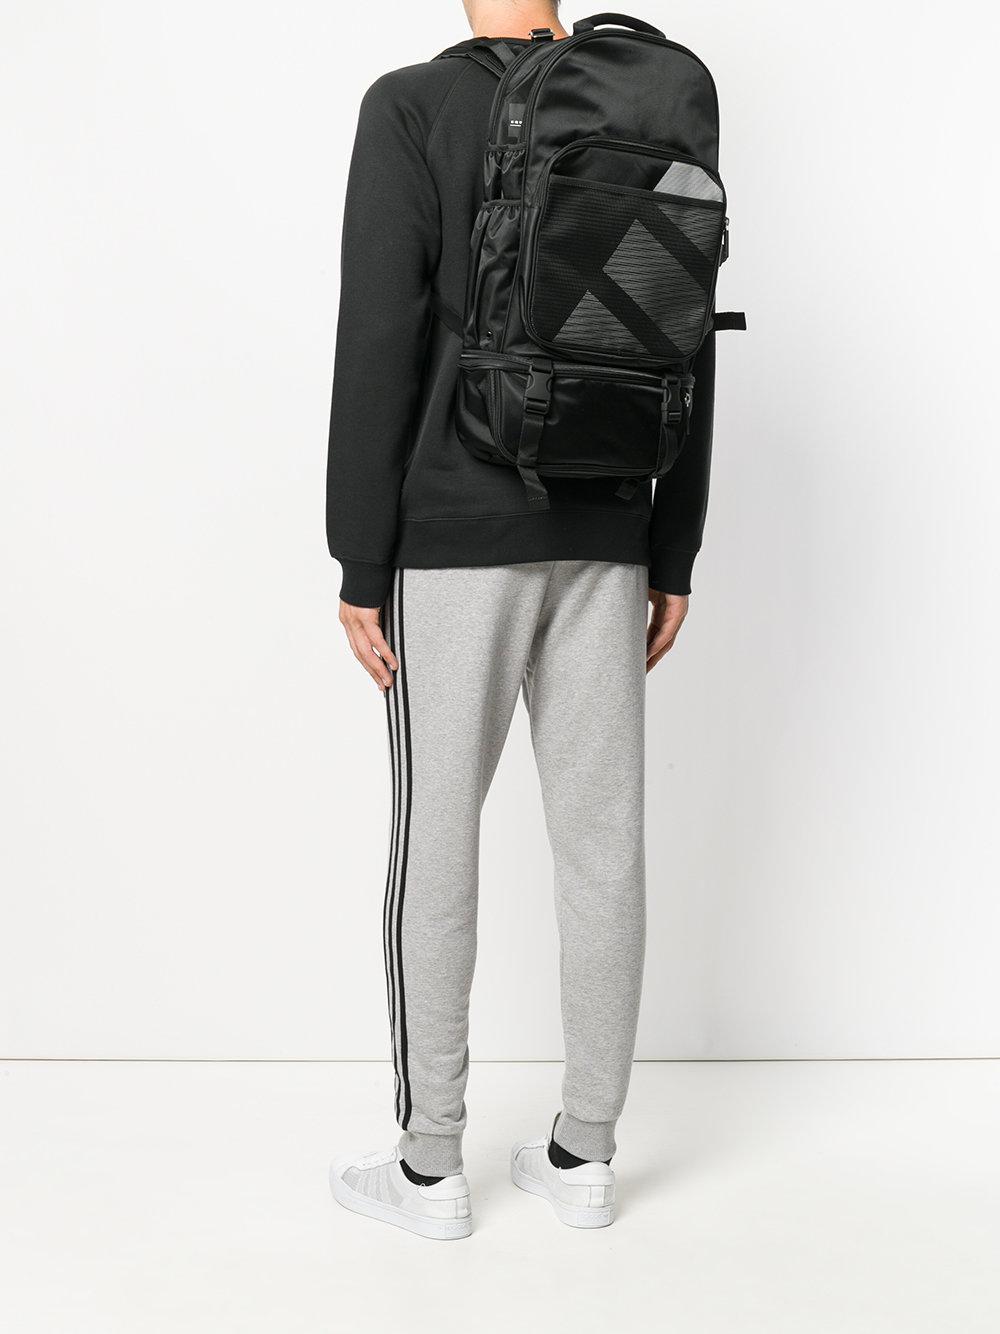 adidas Synthetic Eqt Street Backpack in Black for Men - Lyst